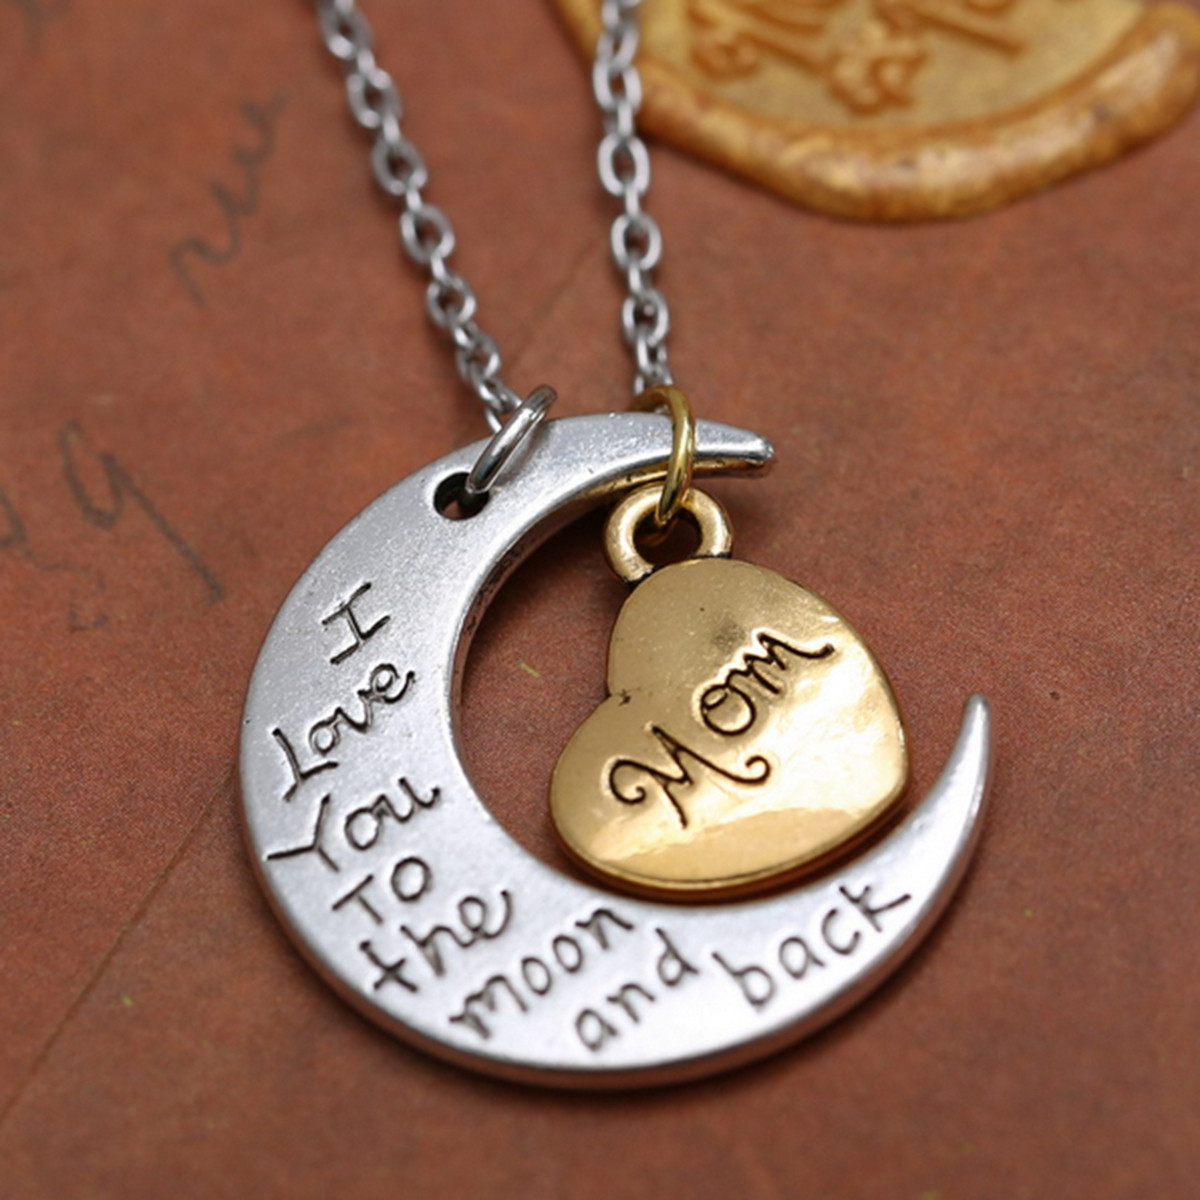 I Love You To The Moon And Back Necklaces
 I LOVE YOU TO THE MOON AND BACK Jewelry Gift Necklace